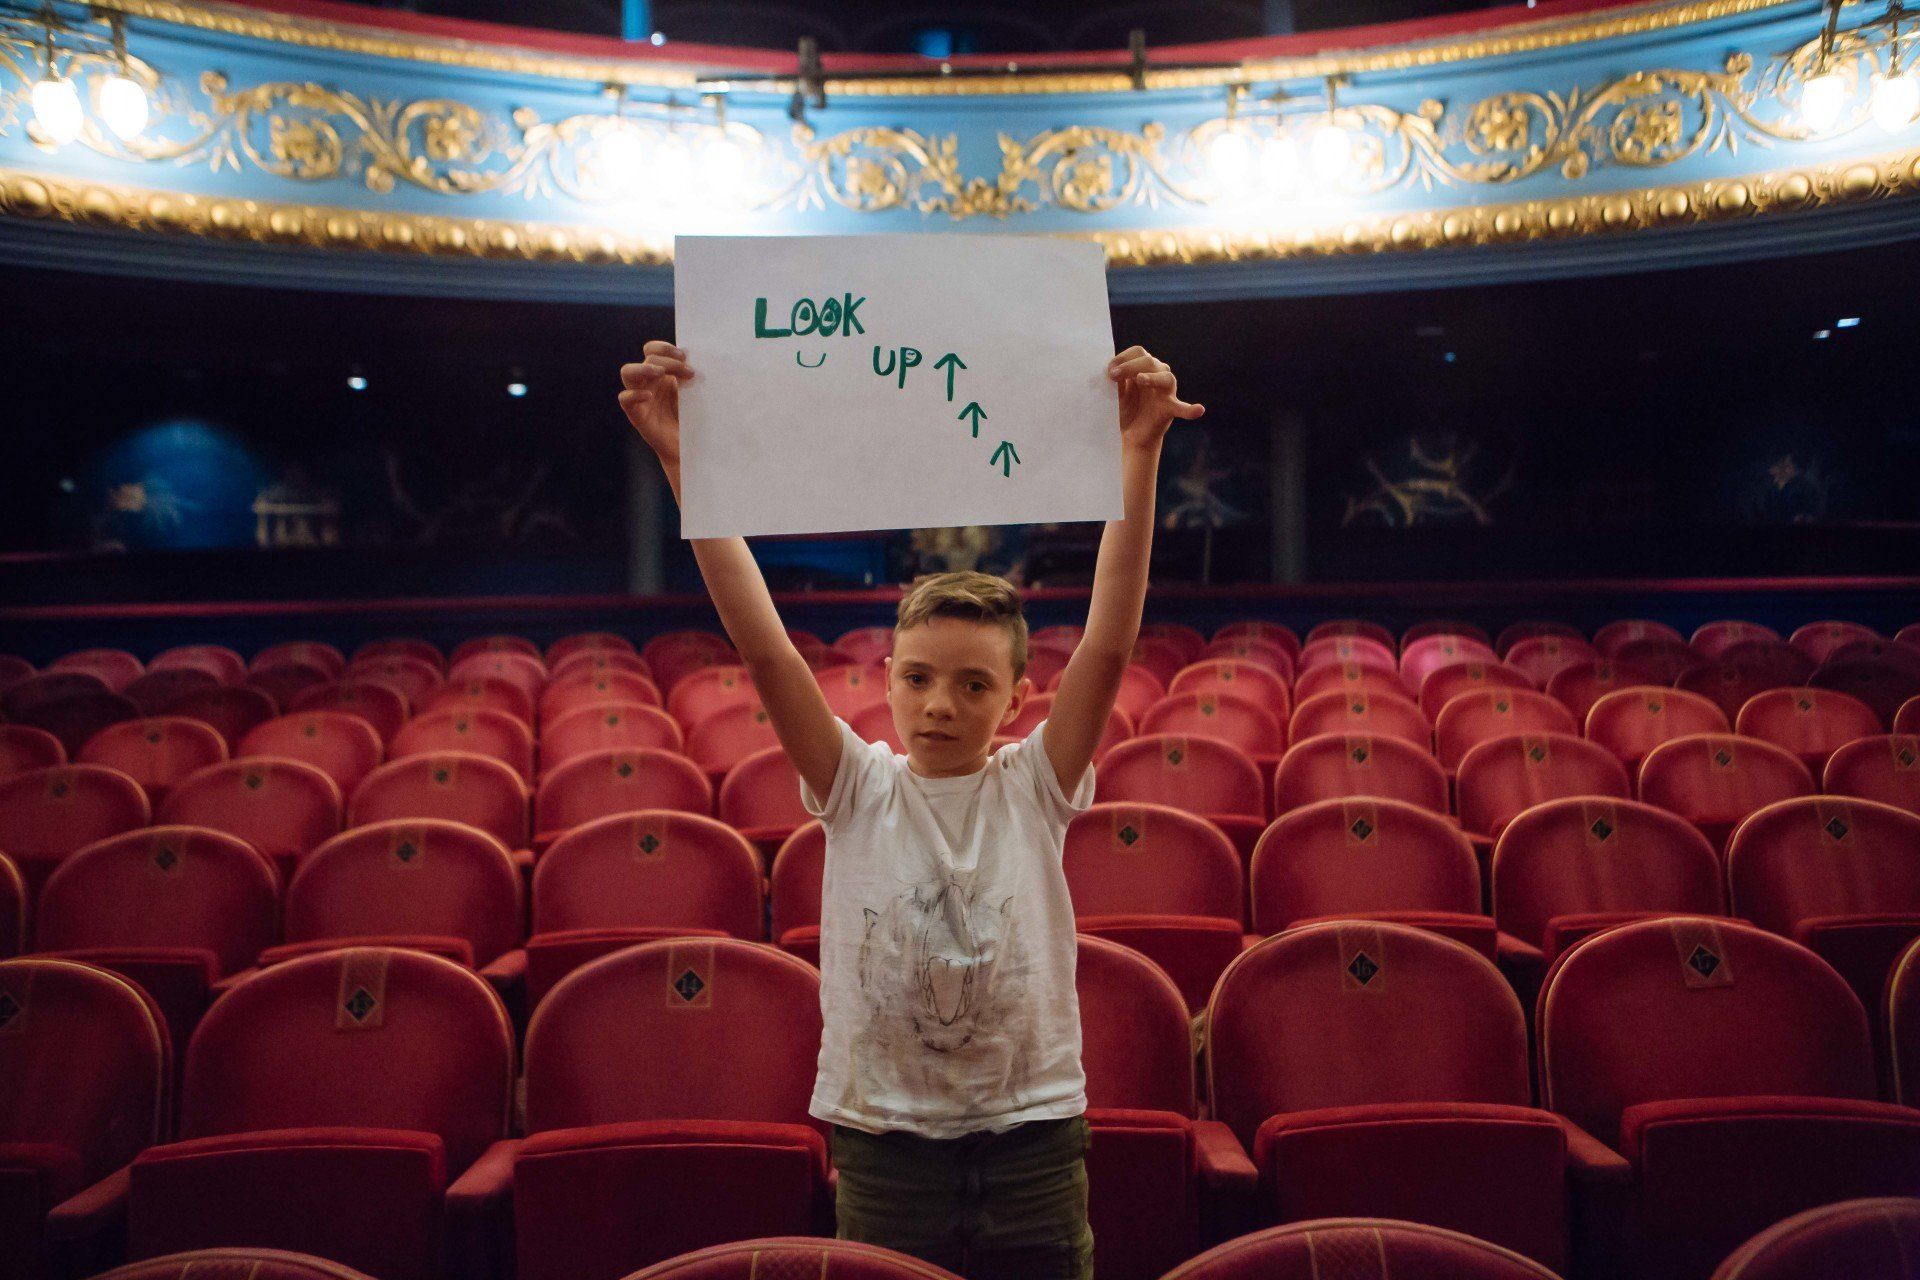 a young boy is holding a sign in an empty auditorium .